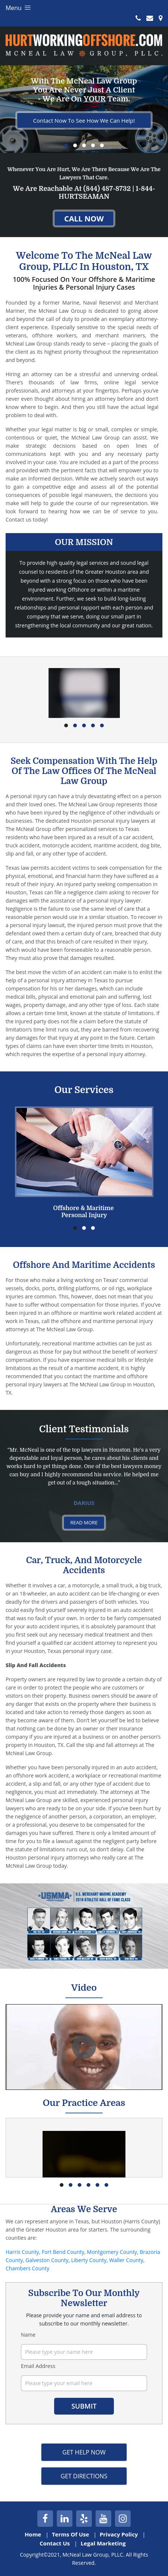 The McNeal Law Group - Houston TX Lawyers